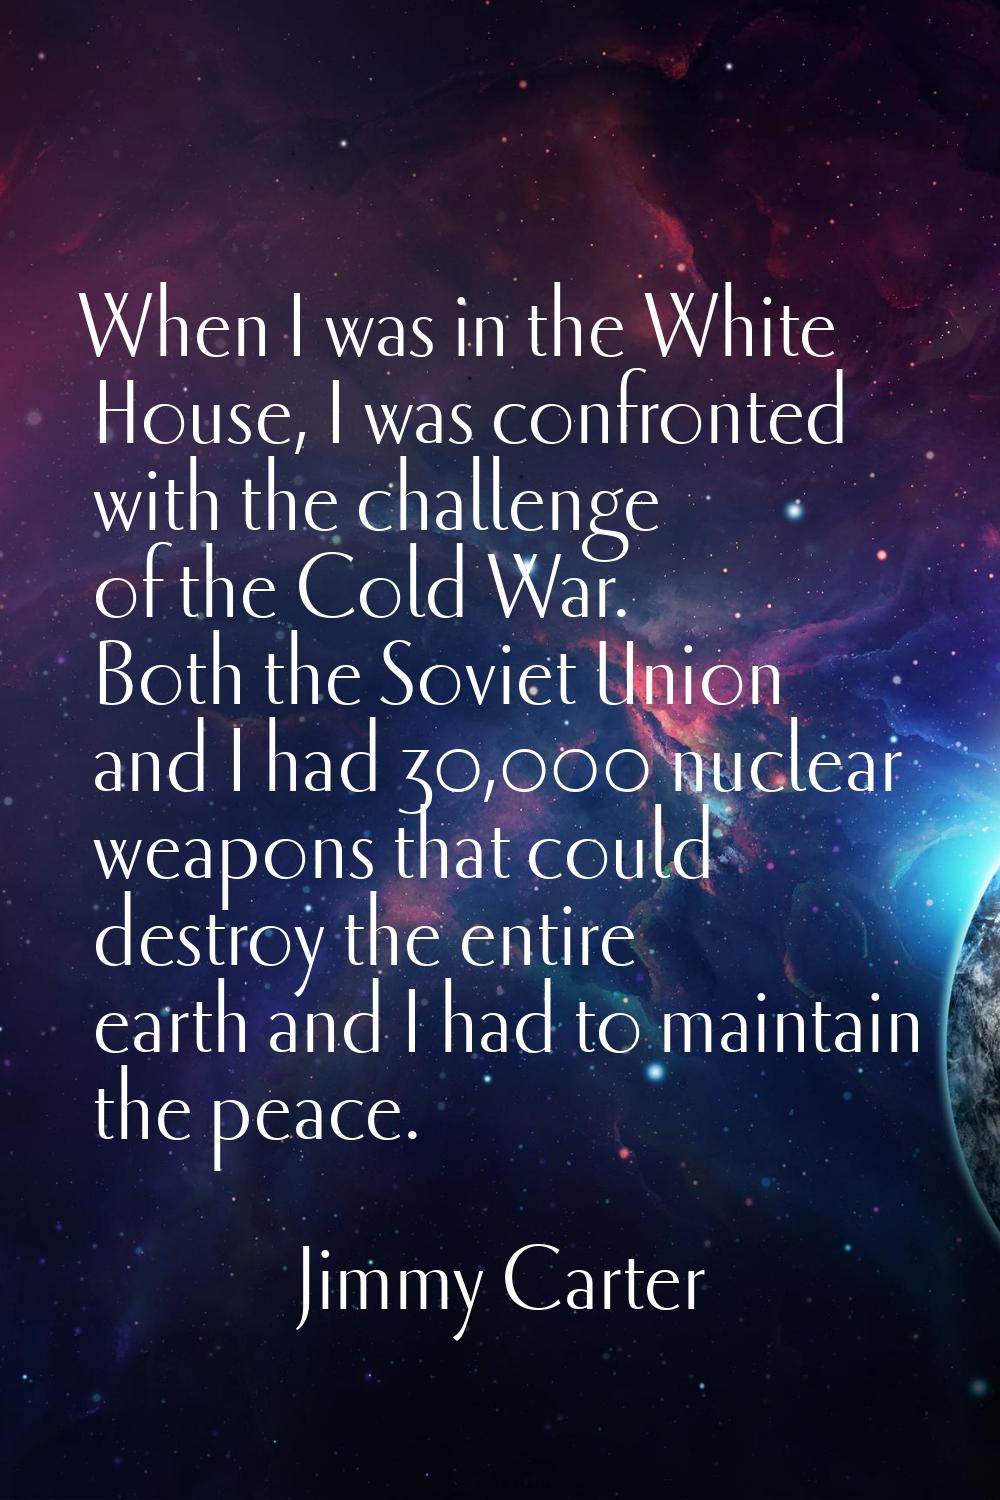 When I was in the White House, I was confronted with the challenge of the Cold War. Both the Soviet